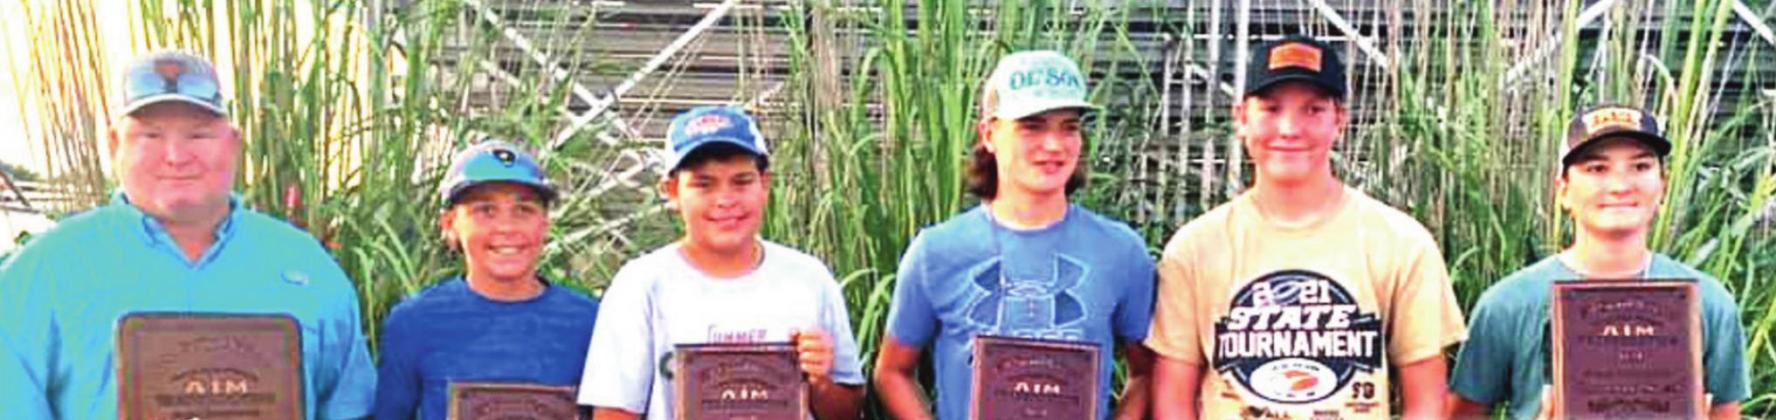 Castro County 4-H shooters Harrison and Oliver Meador